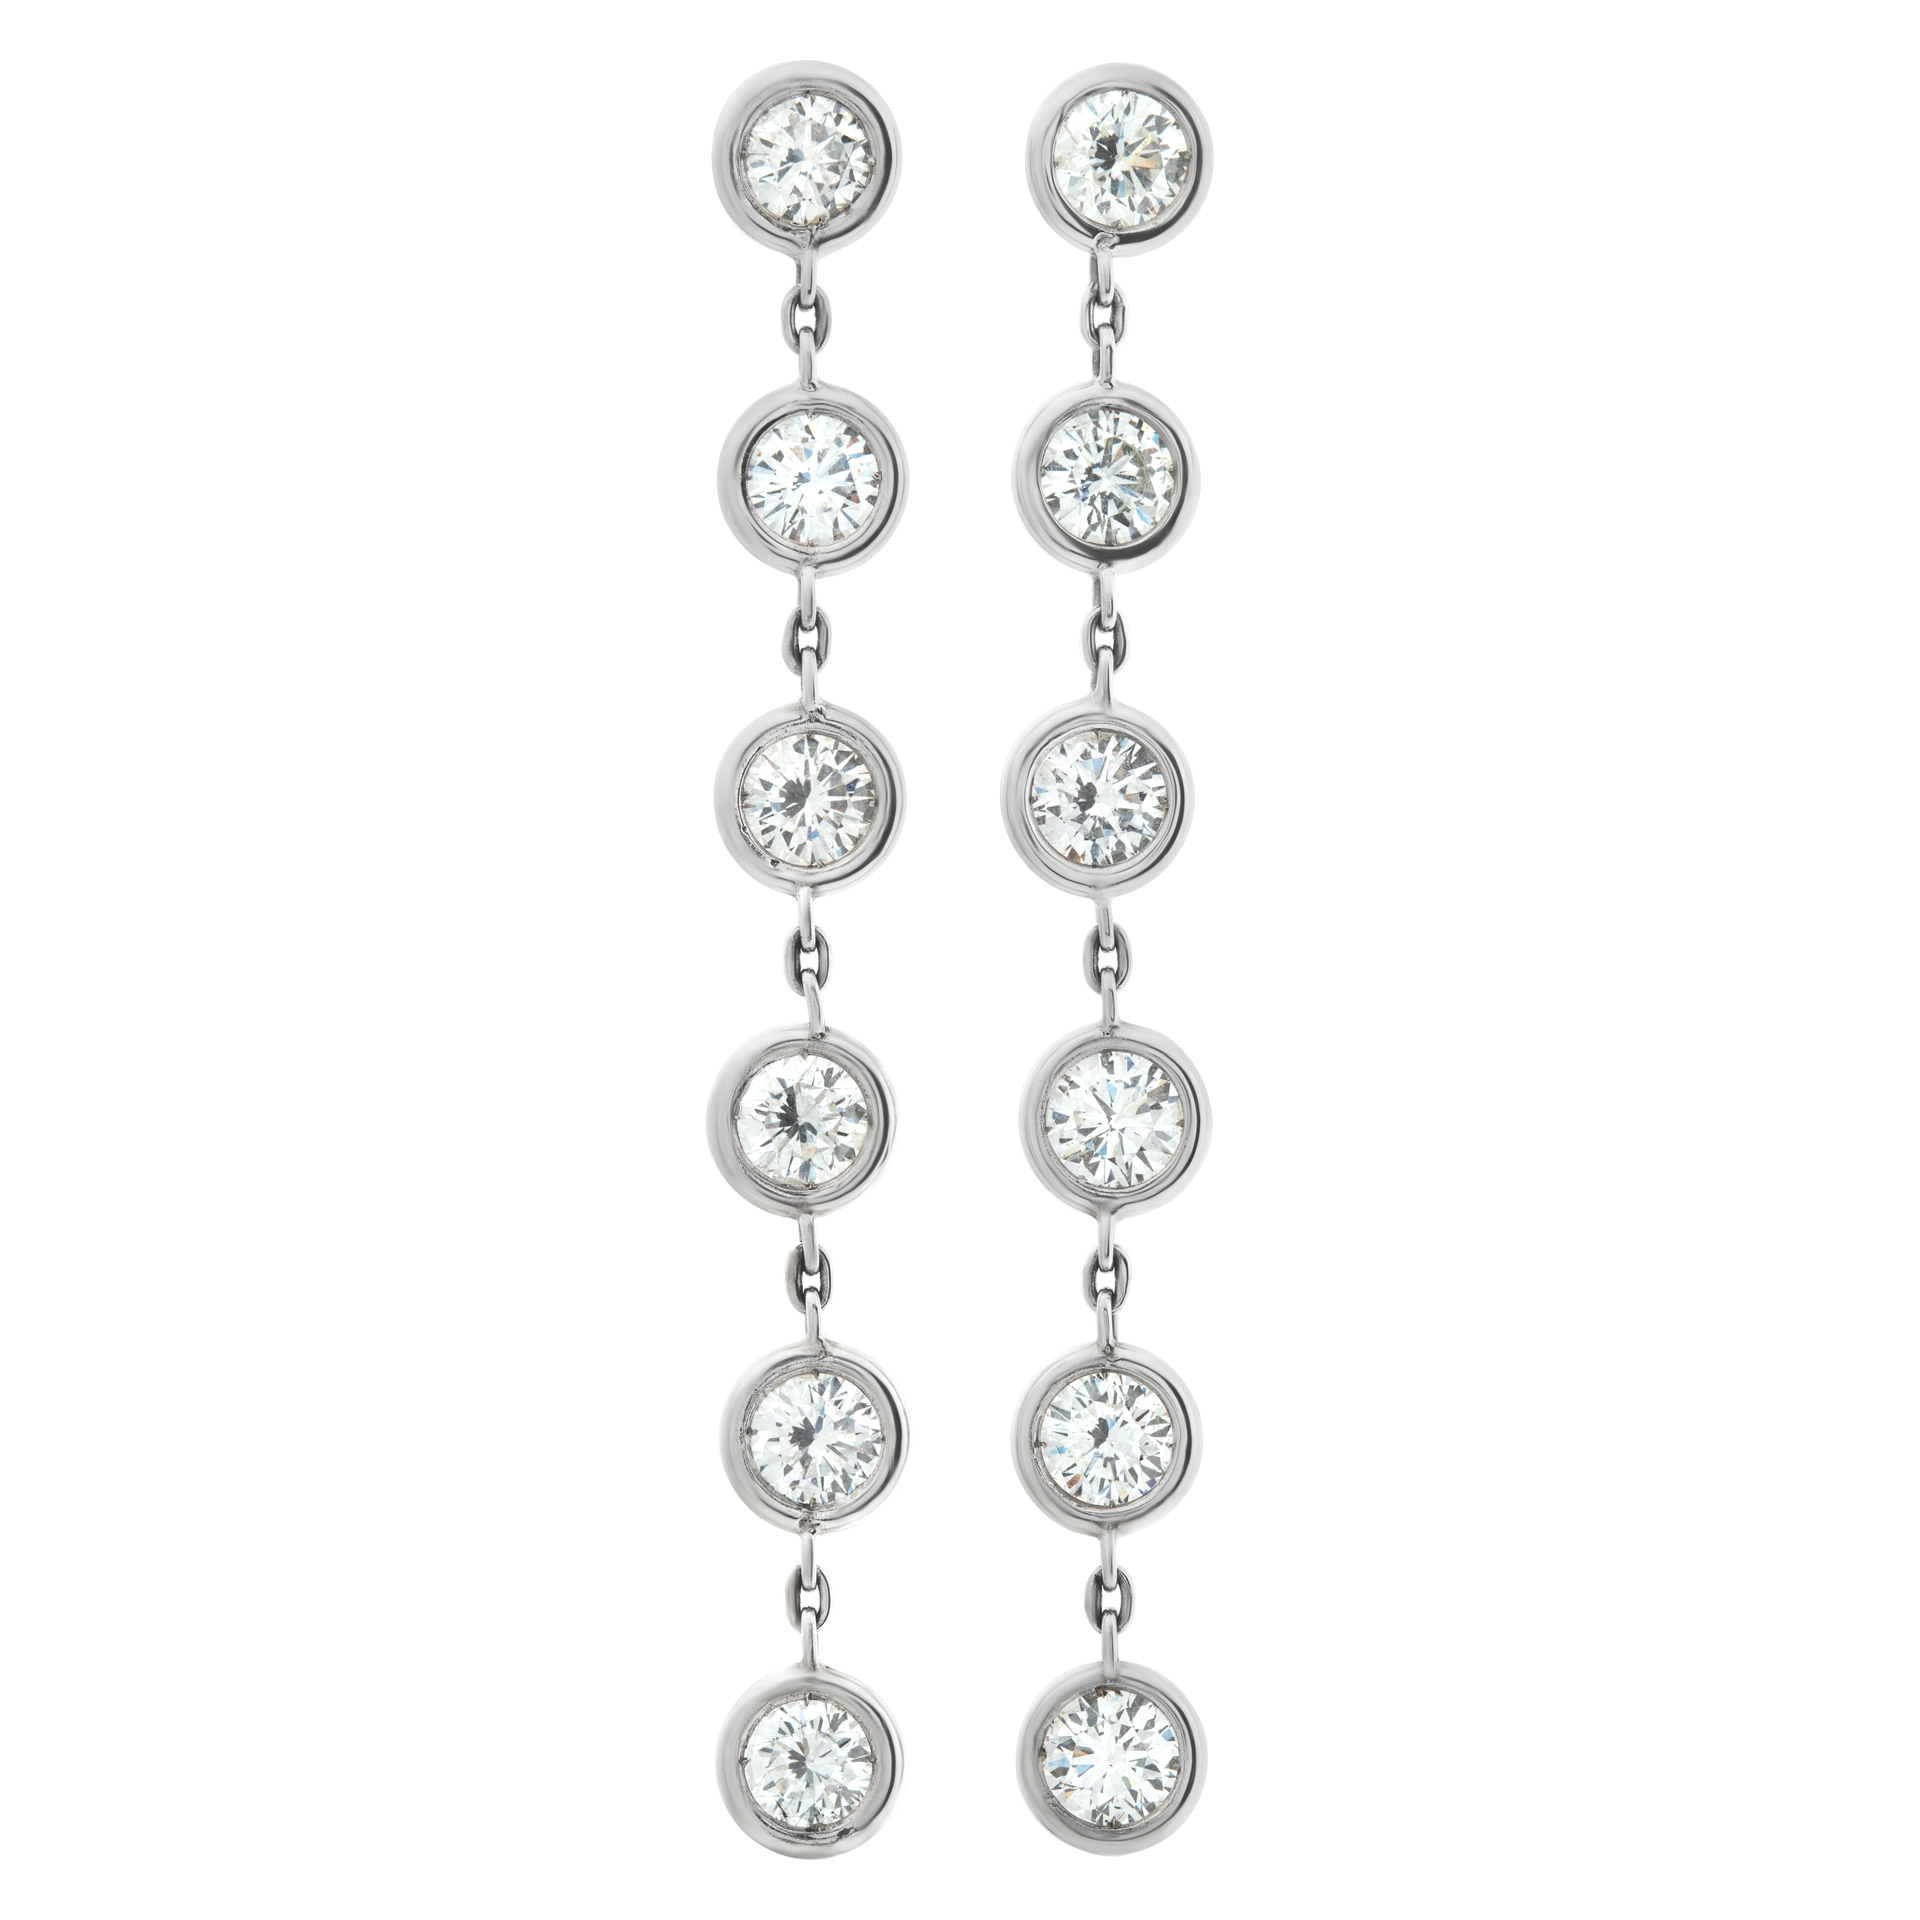 Diamond drop earrings with approximately 5 carats total weight in round diamonds image 1